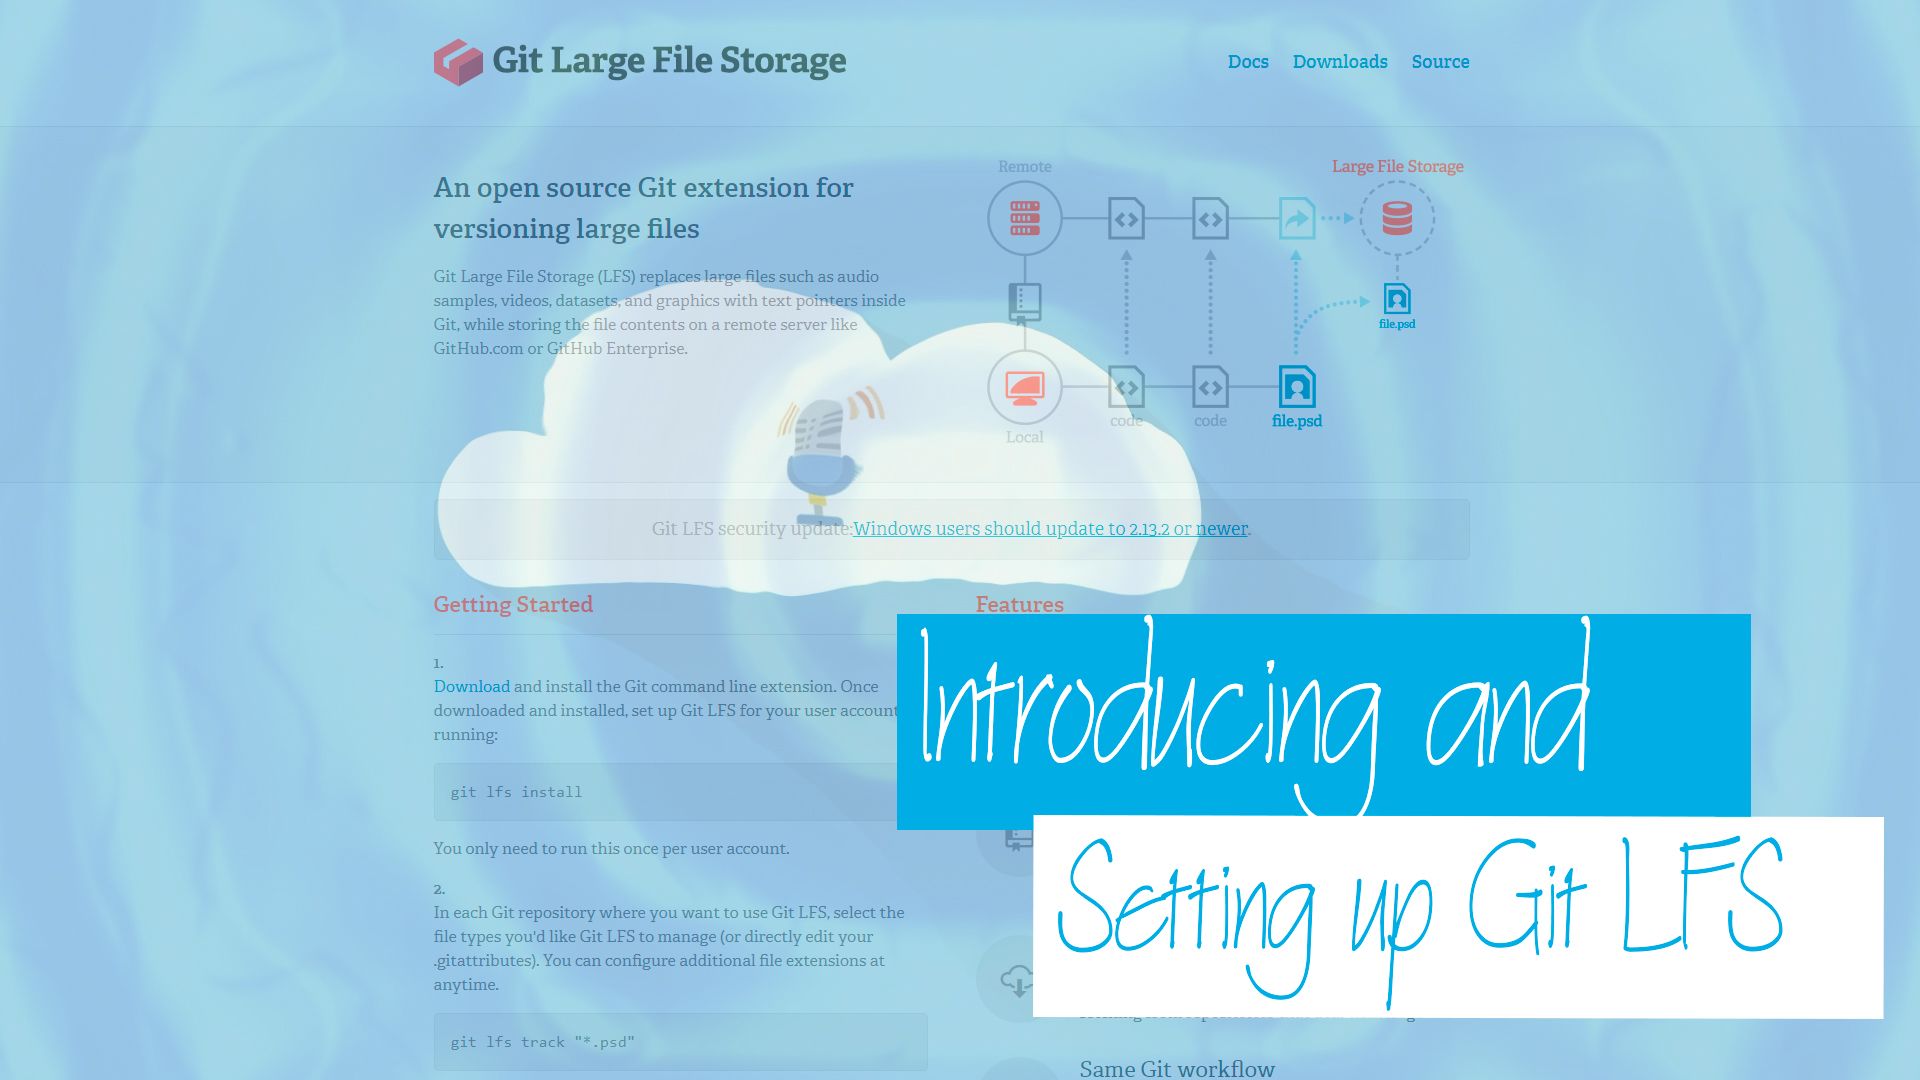 Cloud Drops - Introducing and Setting up Git LFS (Large File Storage)